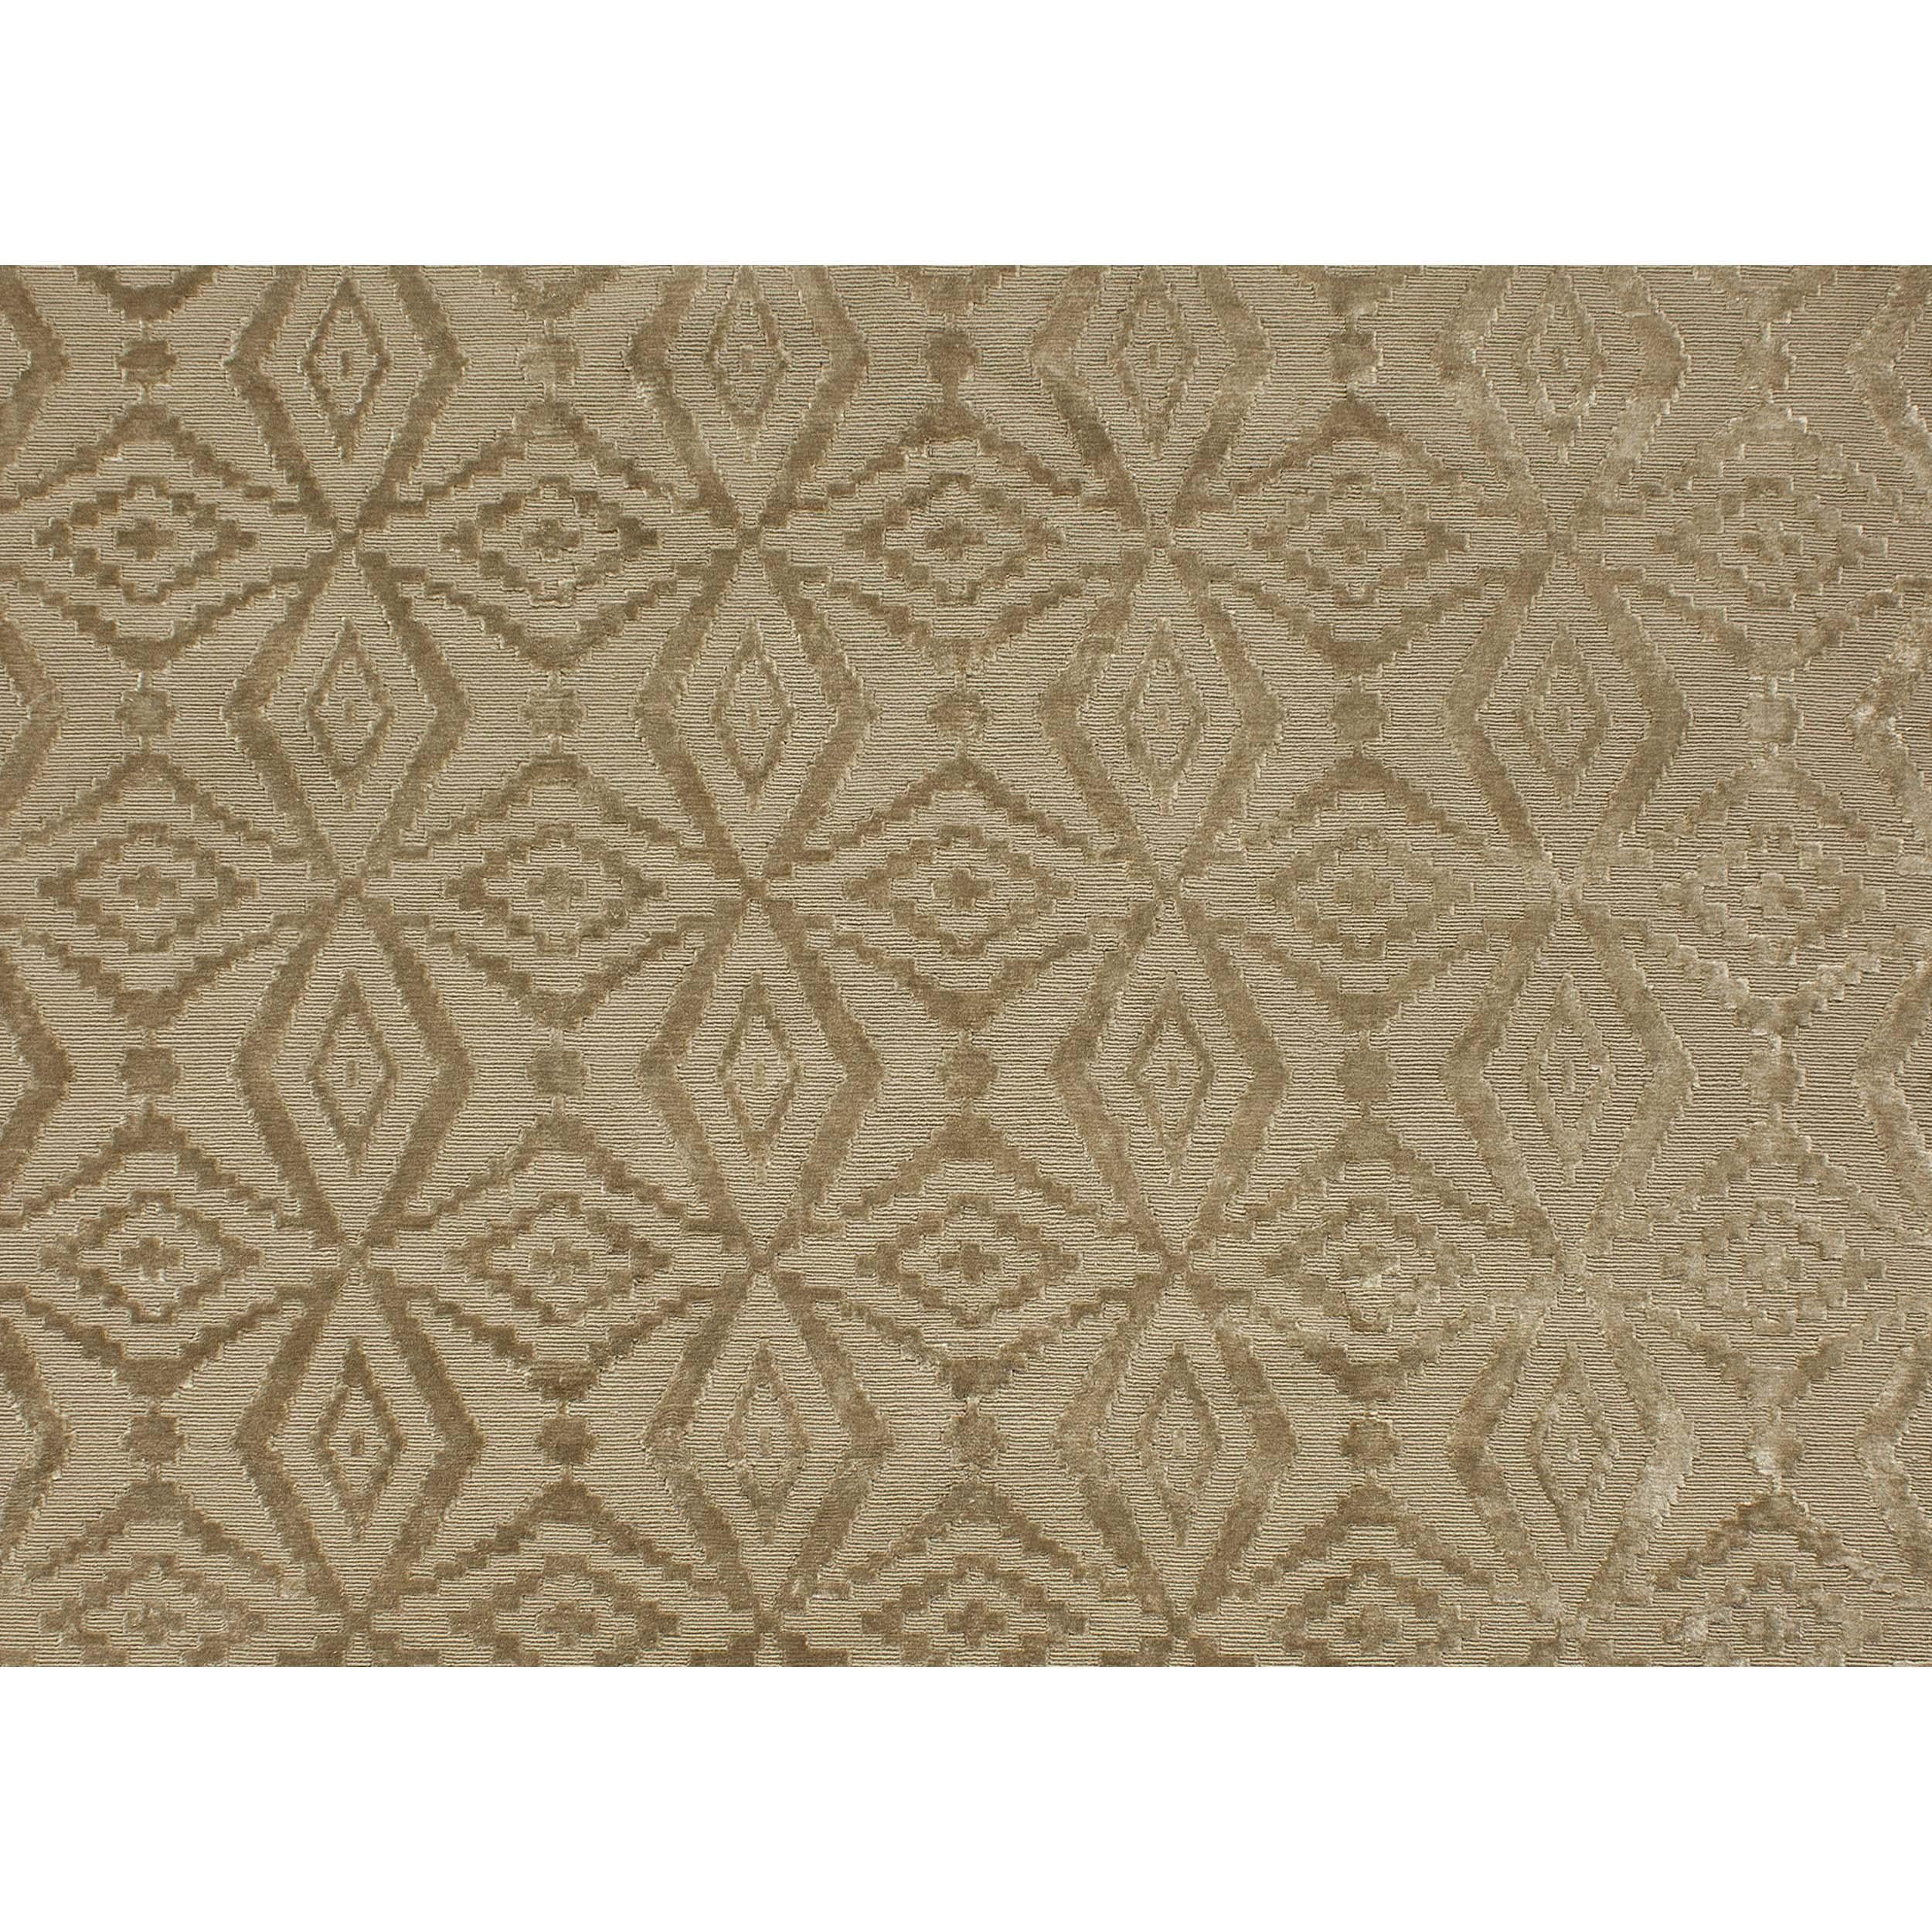 This exquisite modern hand-knotted rug from India offers a delightful sensory experience, captivating both touch and sight with its luscious hand-loomed design. A unique blend of wool and lustrous viscose creates a surface that is not only